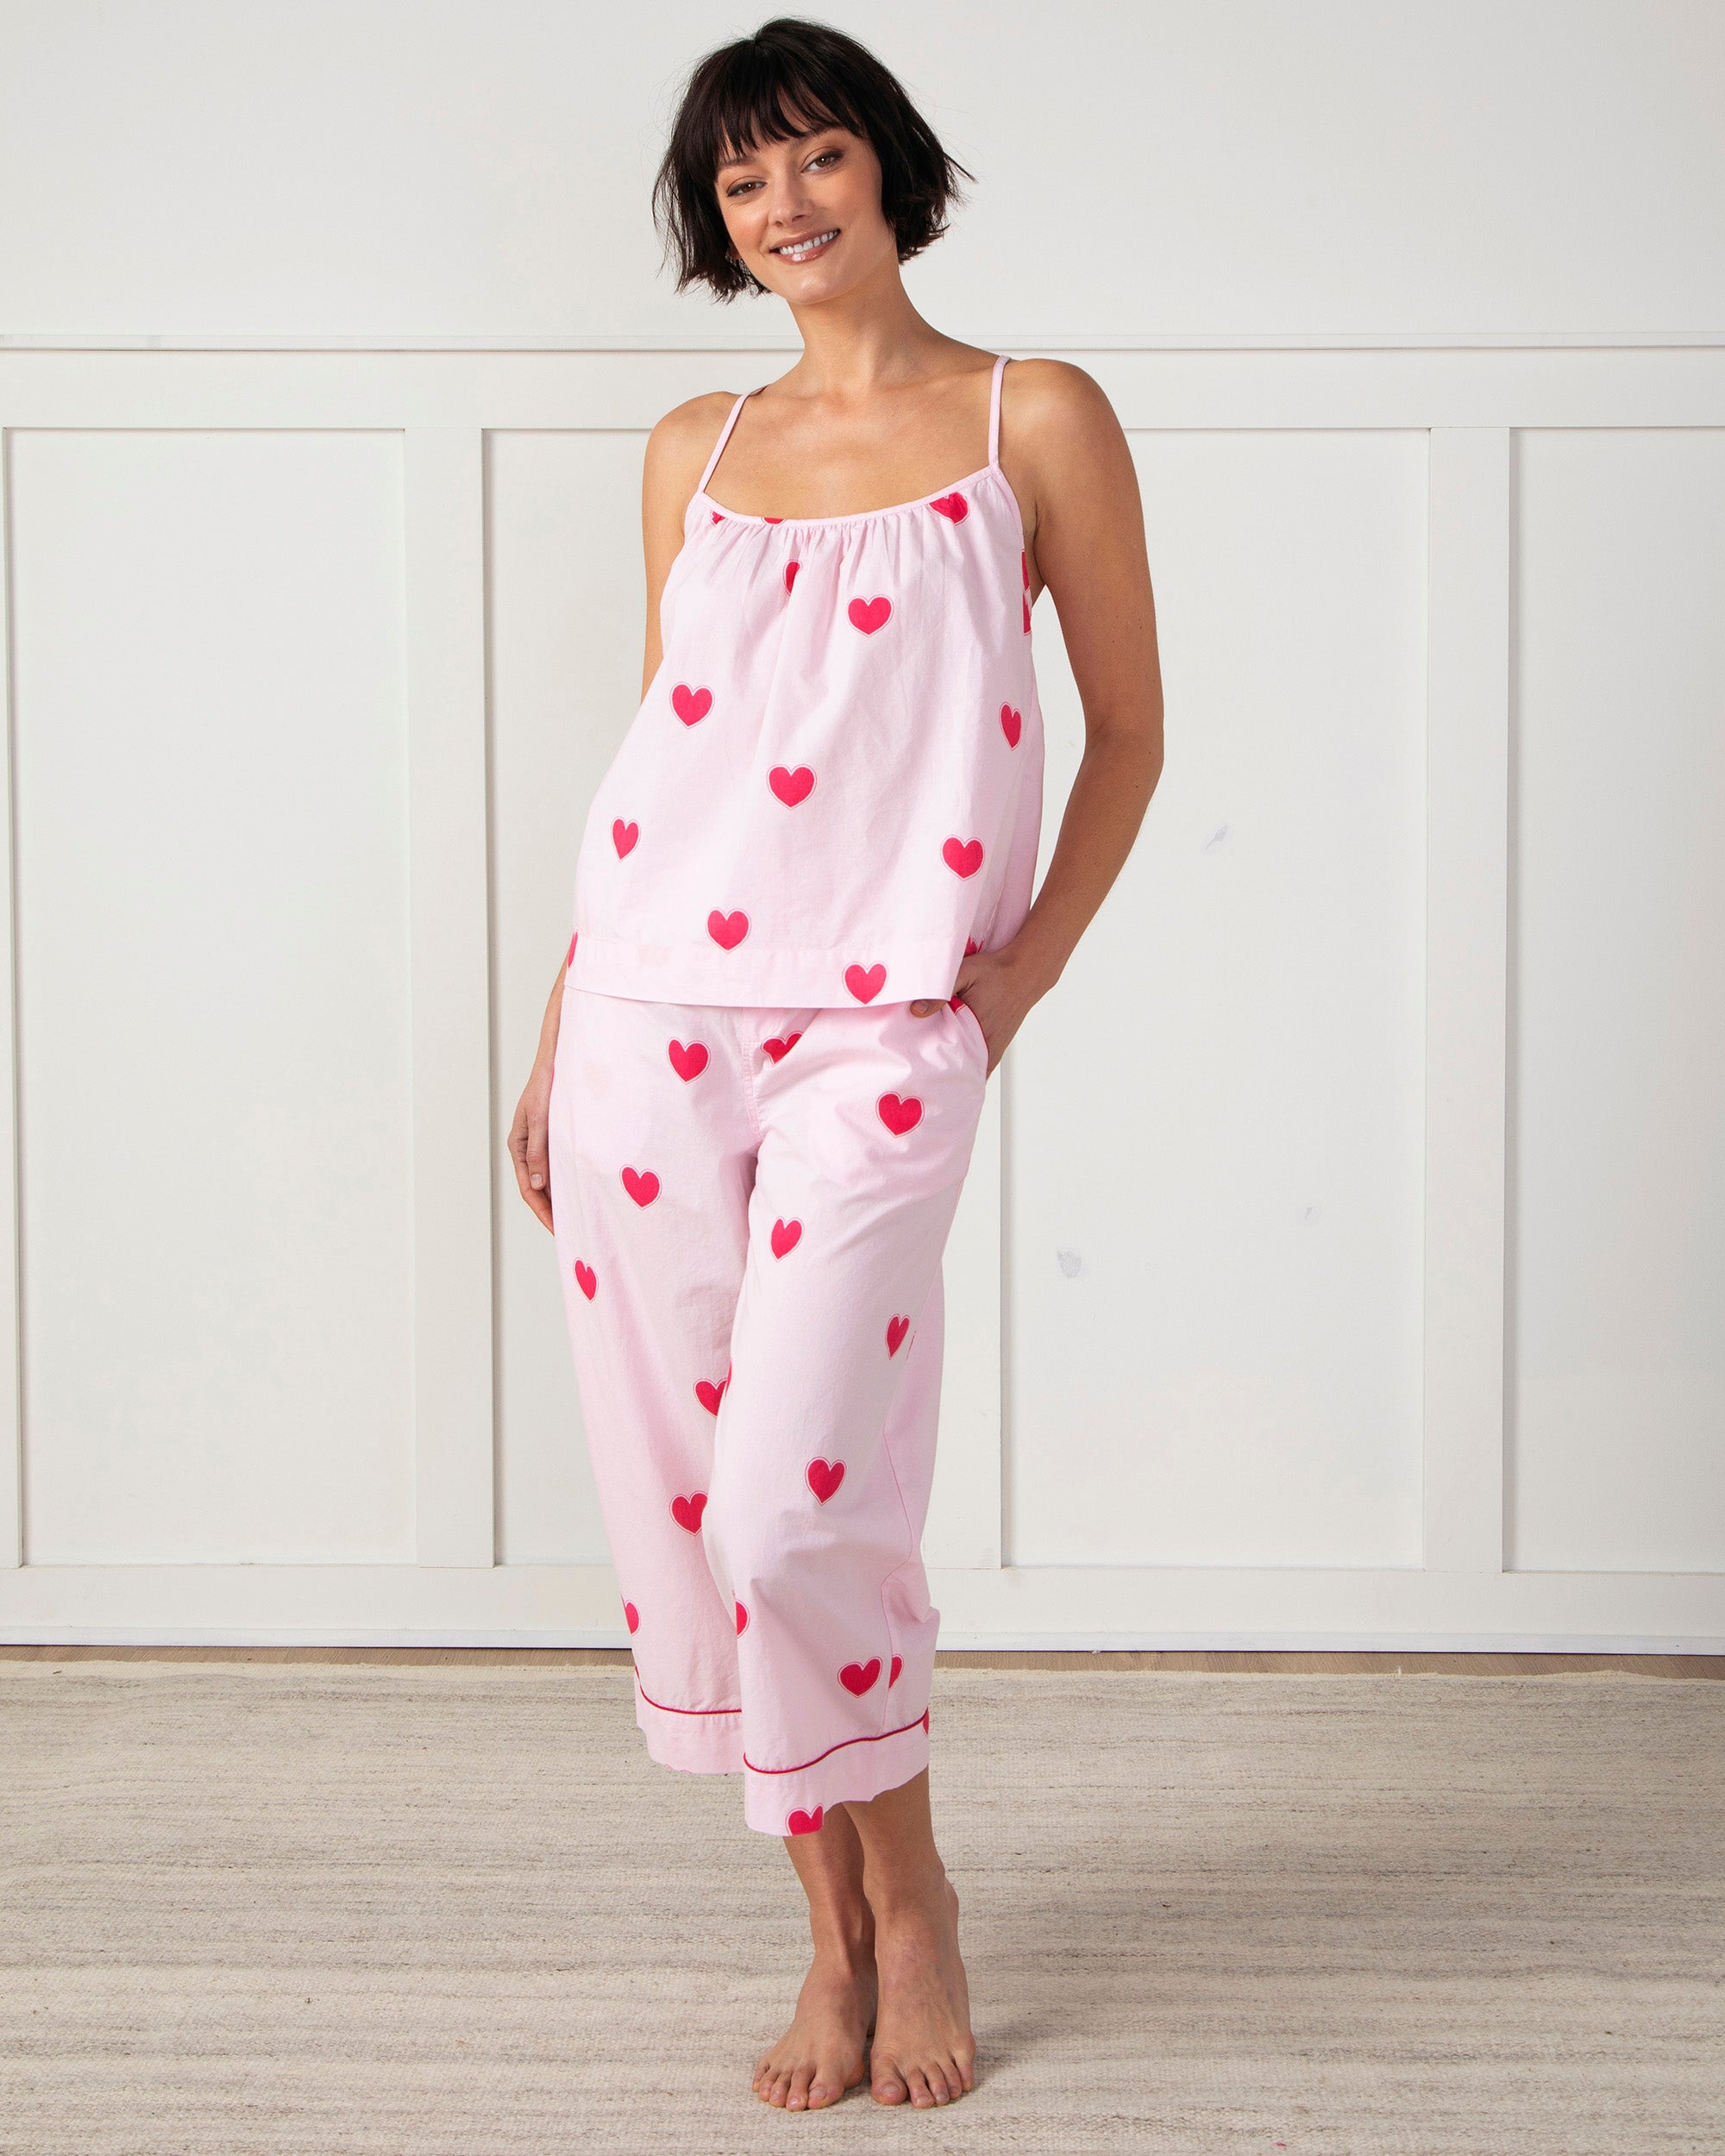 Queen Of Hearts - Women's Cotton Cami Cropped Pants Set - Candy Pink